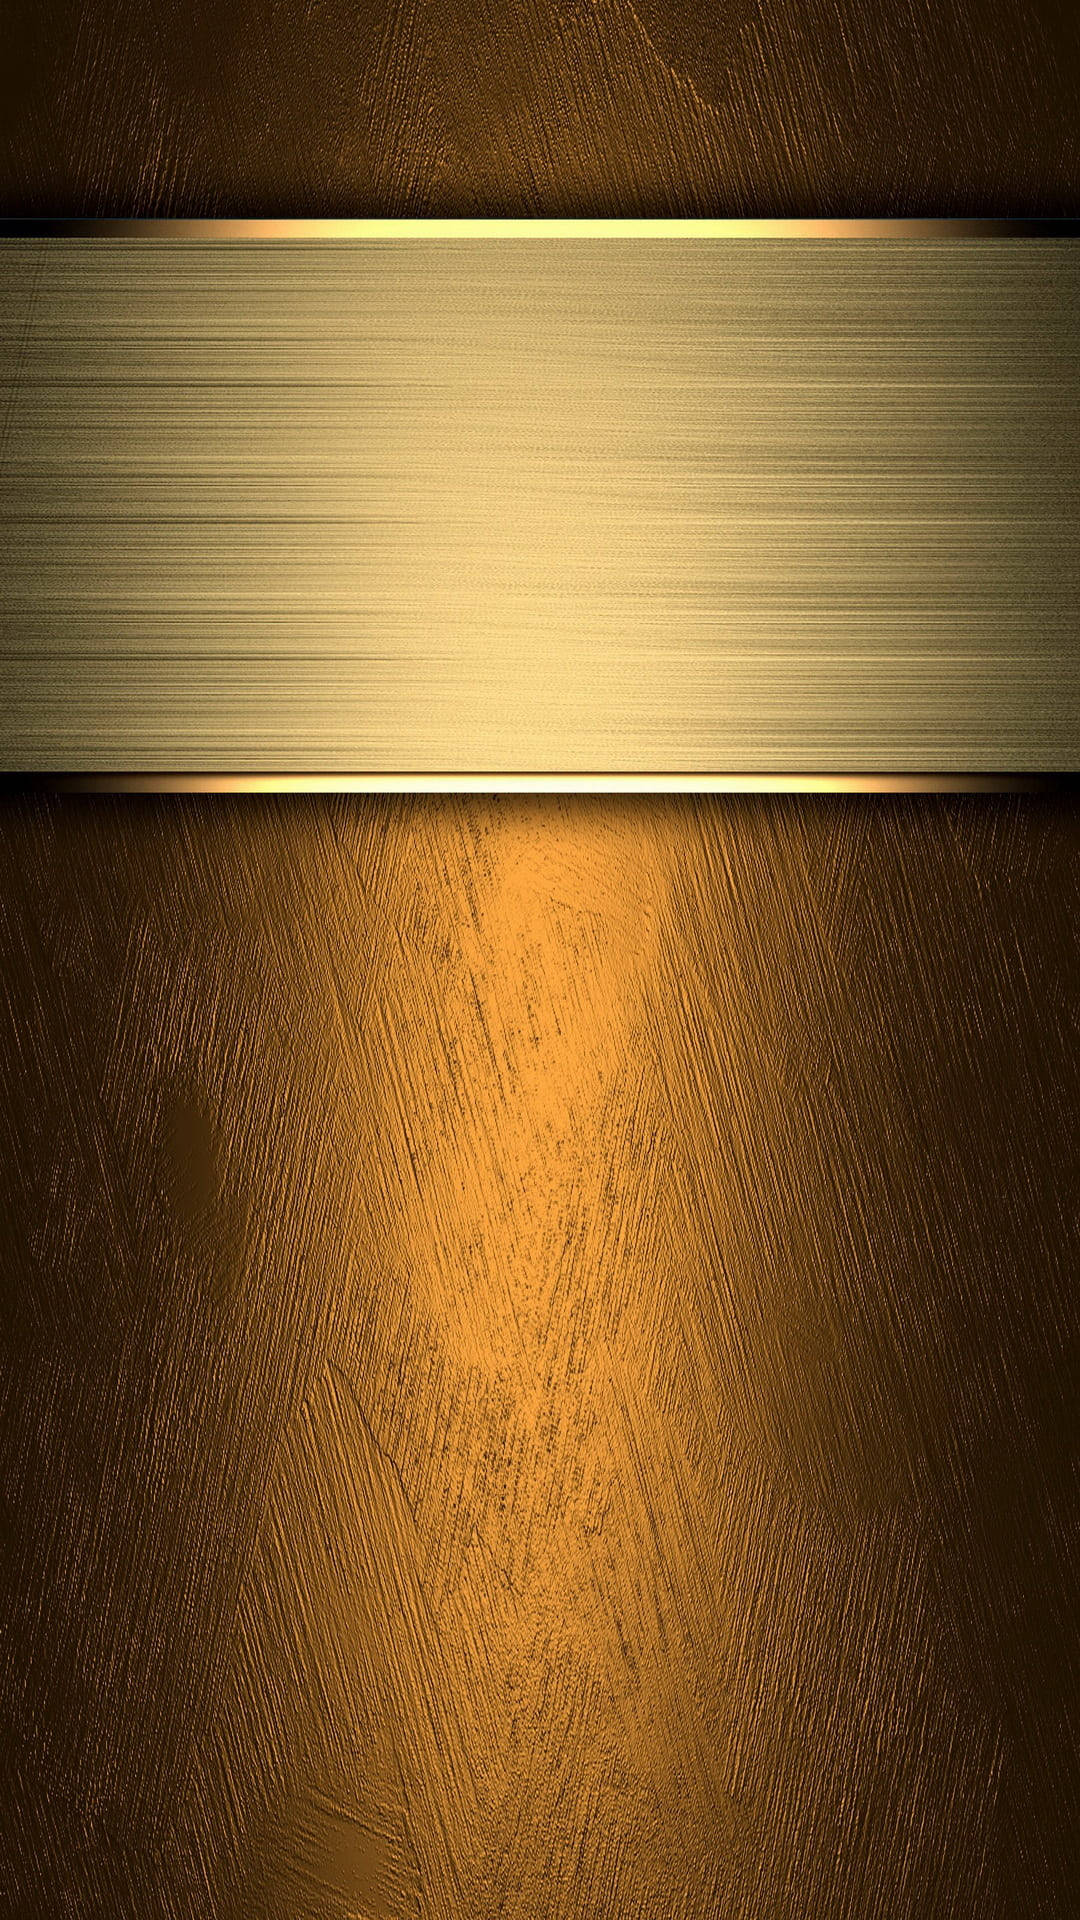 Iphone 12 Pro Max Gold Textures Picture